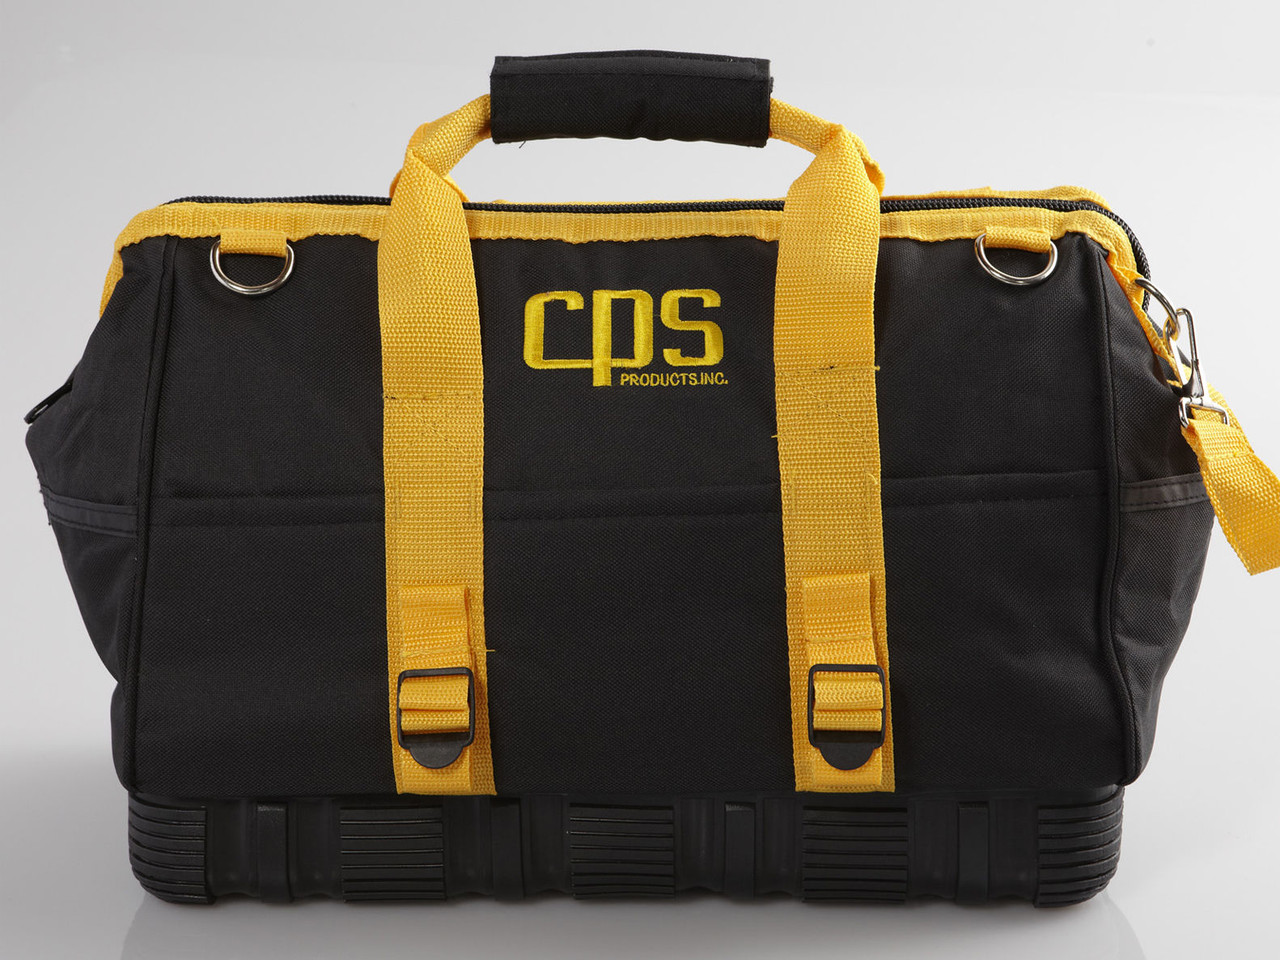 TLBAG2 CPS Rubber Bottom Tool Bag Open-Mouth Organizer